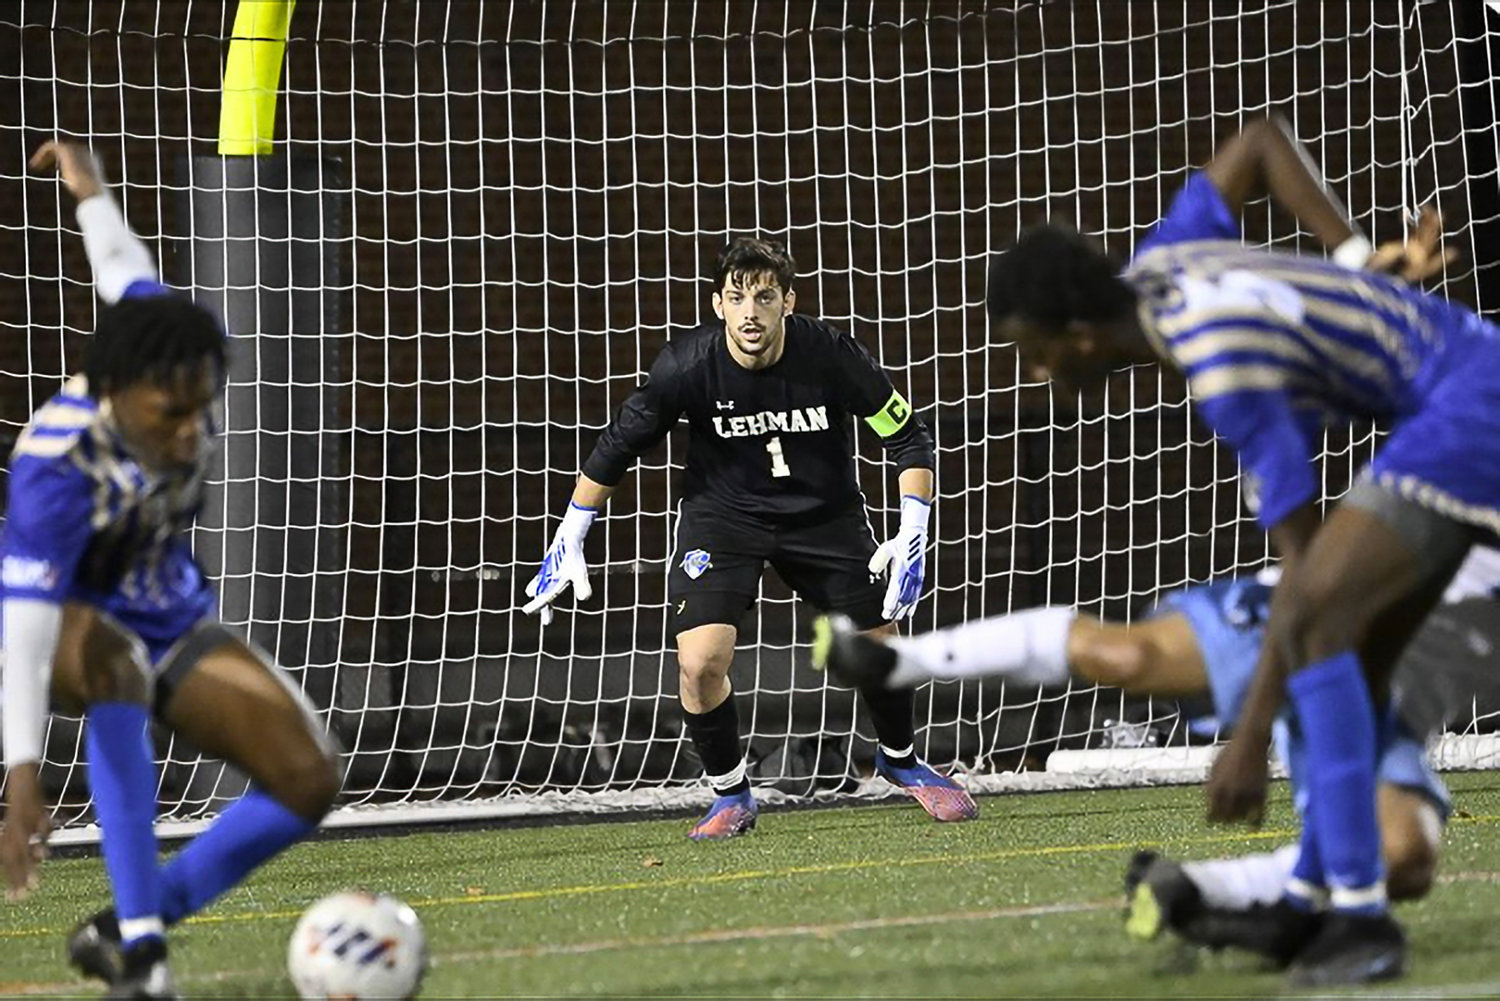 Lehman College goalie Demiraldo Grunasi awaits a shot on goal by a Johns Hopkins’ forward during the NCAA Div. III men’s soccer tournament in Baltimore Nov. 12. The Lightning lost, 3-0, in the opening round affair.